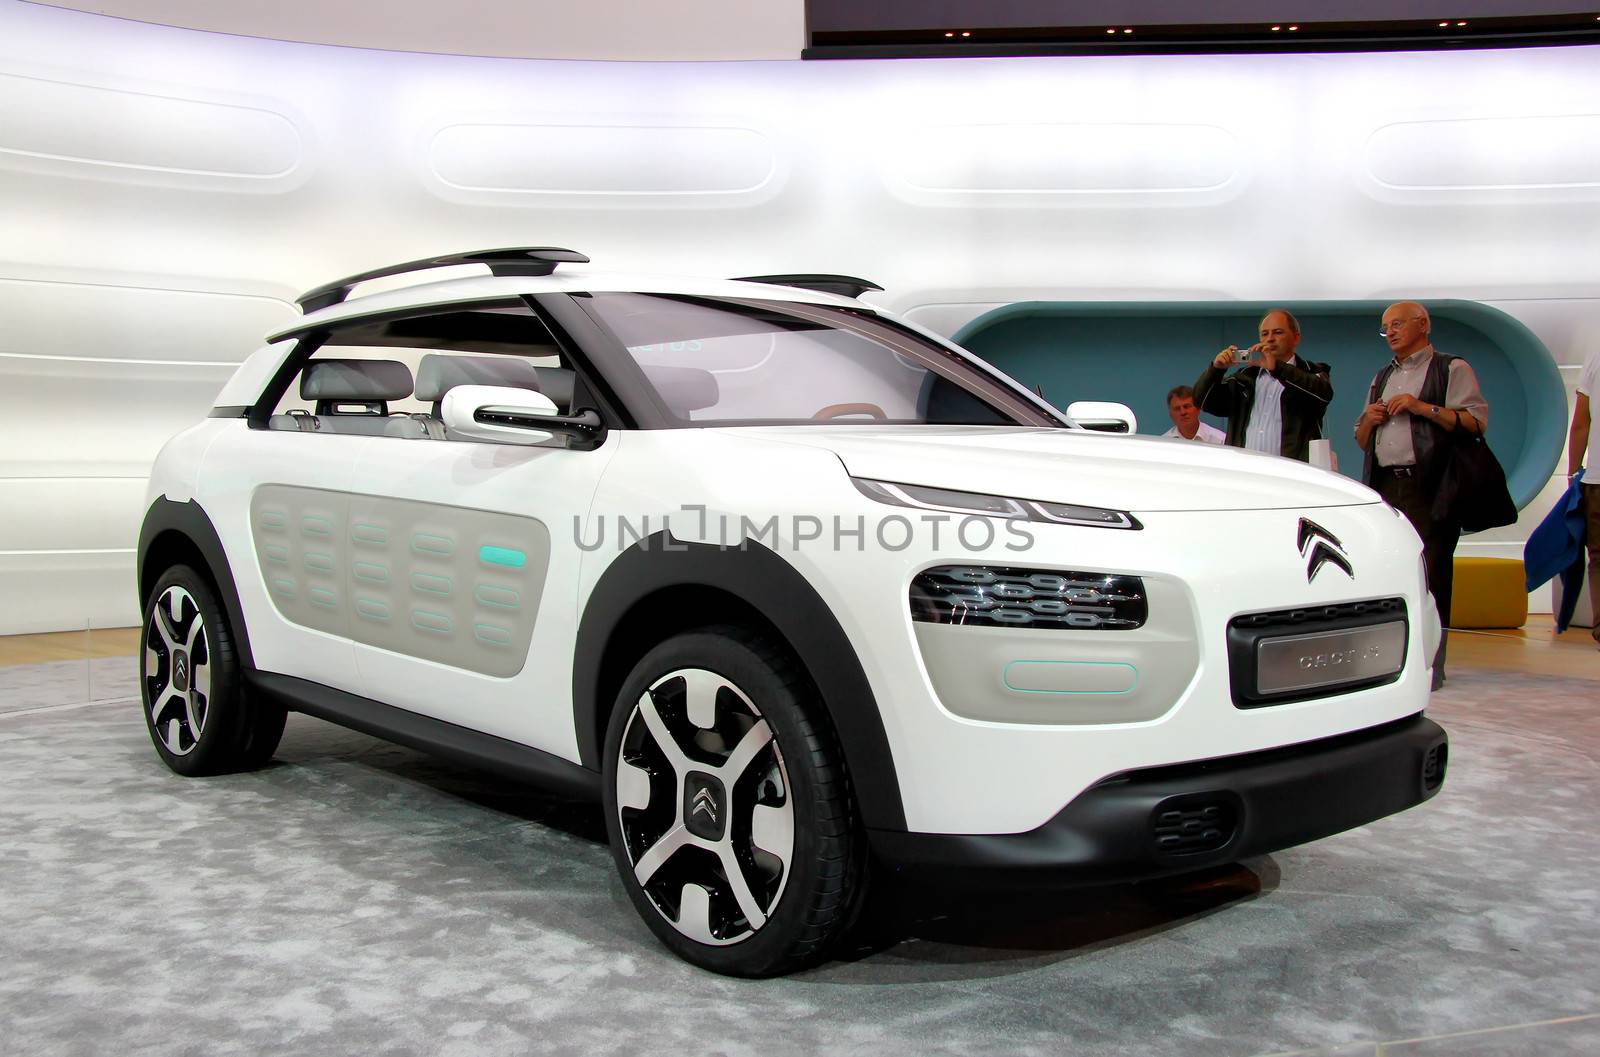 FRANKFURT AM MAIN, GERMANY - SEPTEMBER 14: French concept car Citroen Cactus exhibited at the annual IAA (Internationale Automobil Ausstellung) on September 14, 2013 in Frankfurt am Main, Germany.